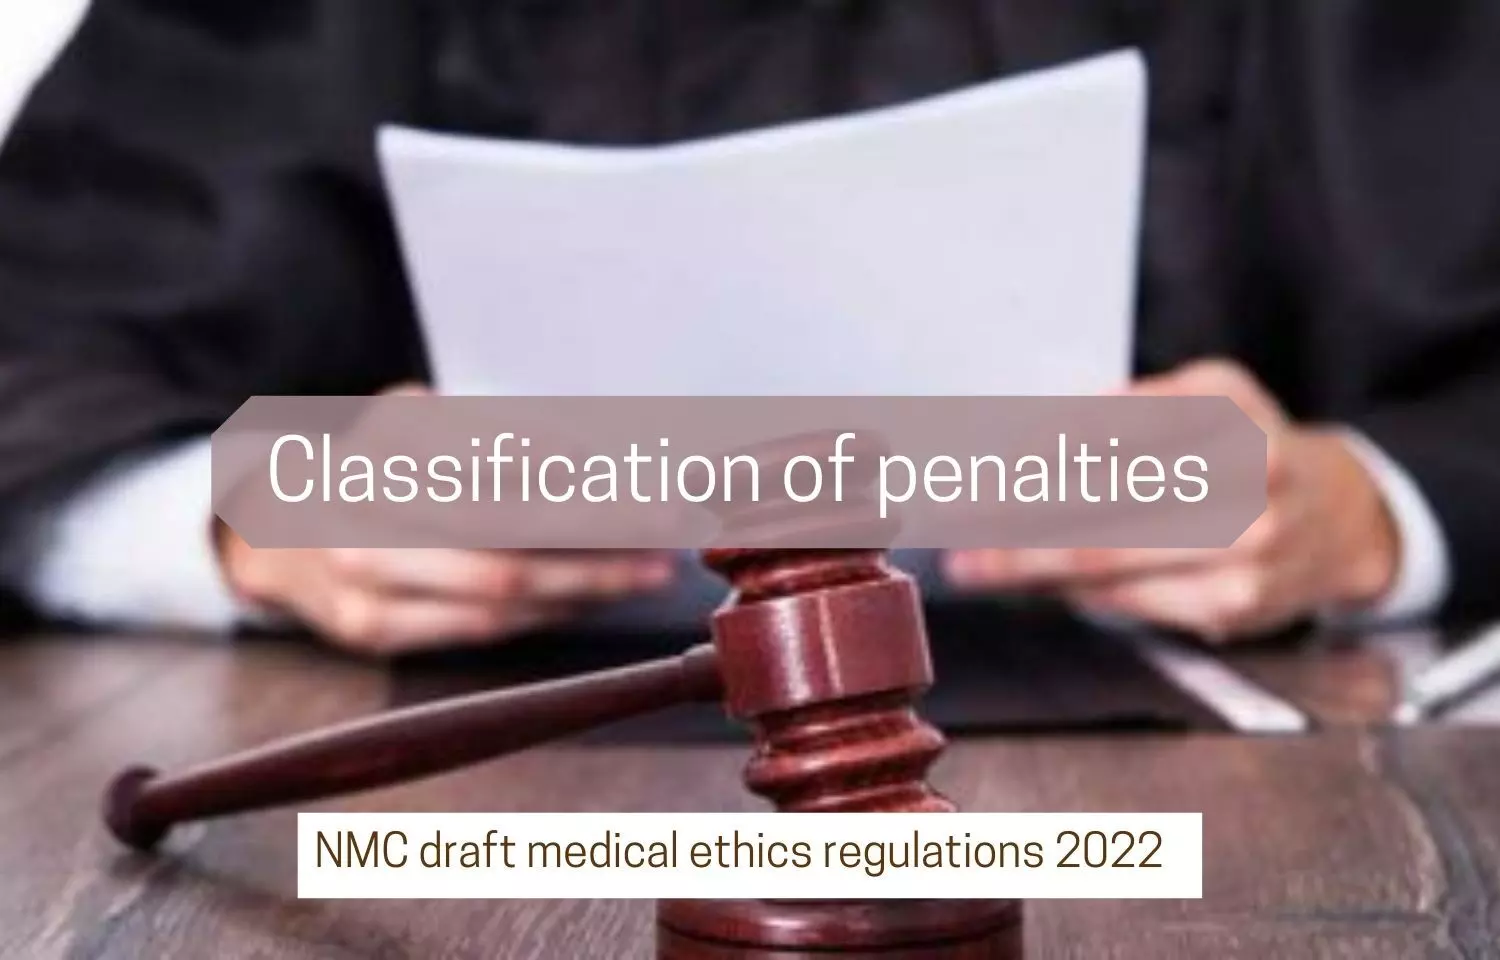 NMC Defines Graded Penalties for Professional Misconduct, details